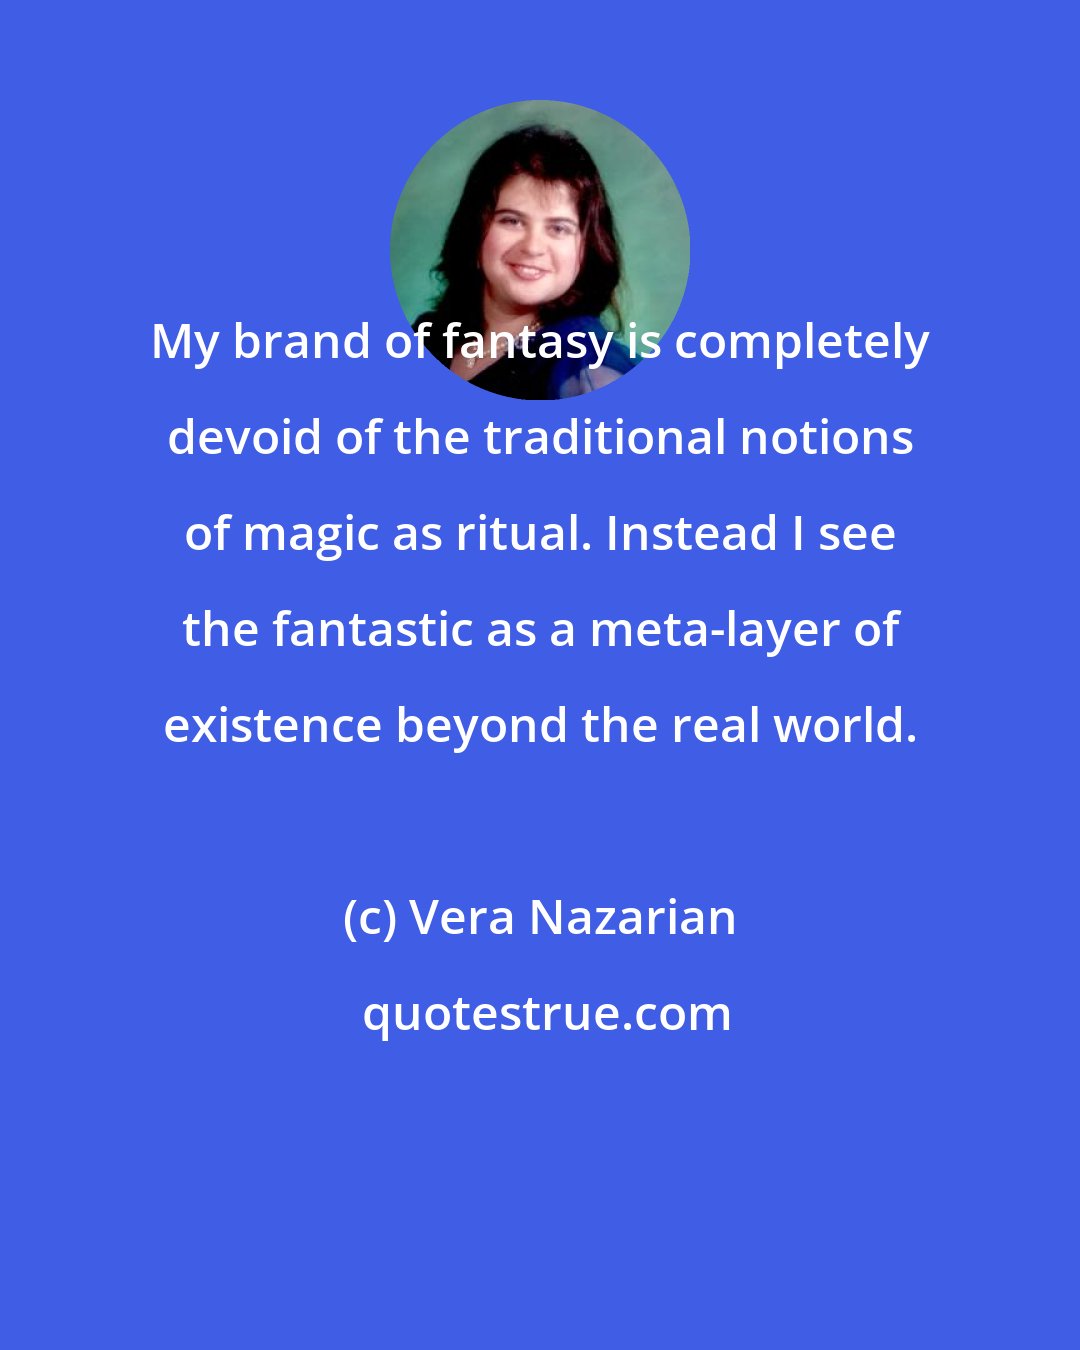 Vera Nazarian: My brand of fantasy is completely devoid of the traditional notions of magic as ritual. Instead I see the fantastic as a meta-layer of existence beyond the real world.